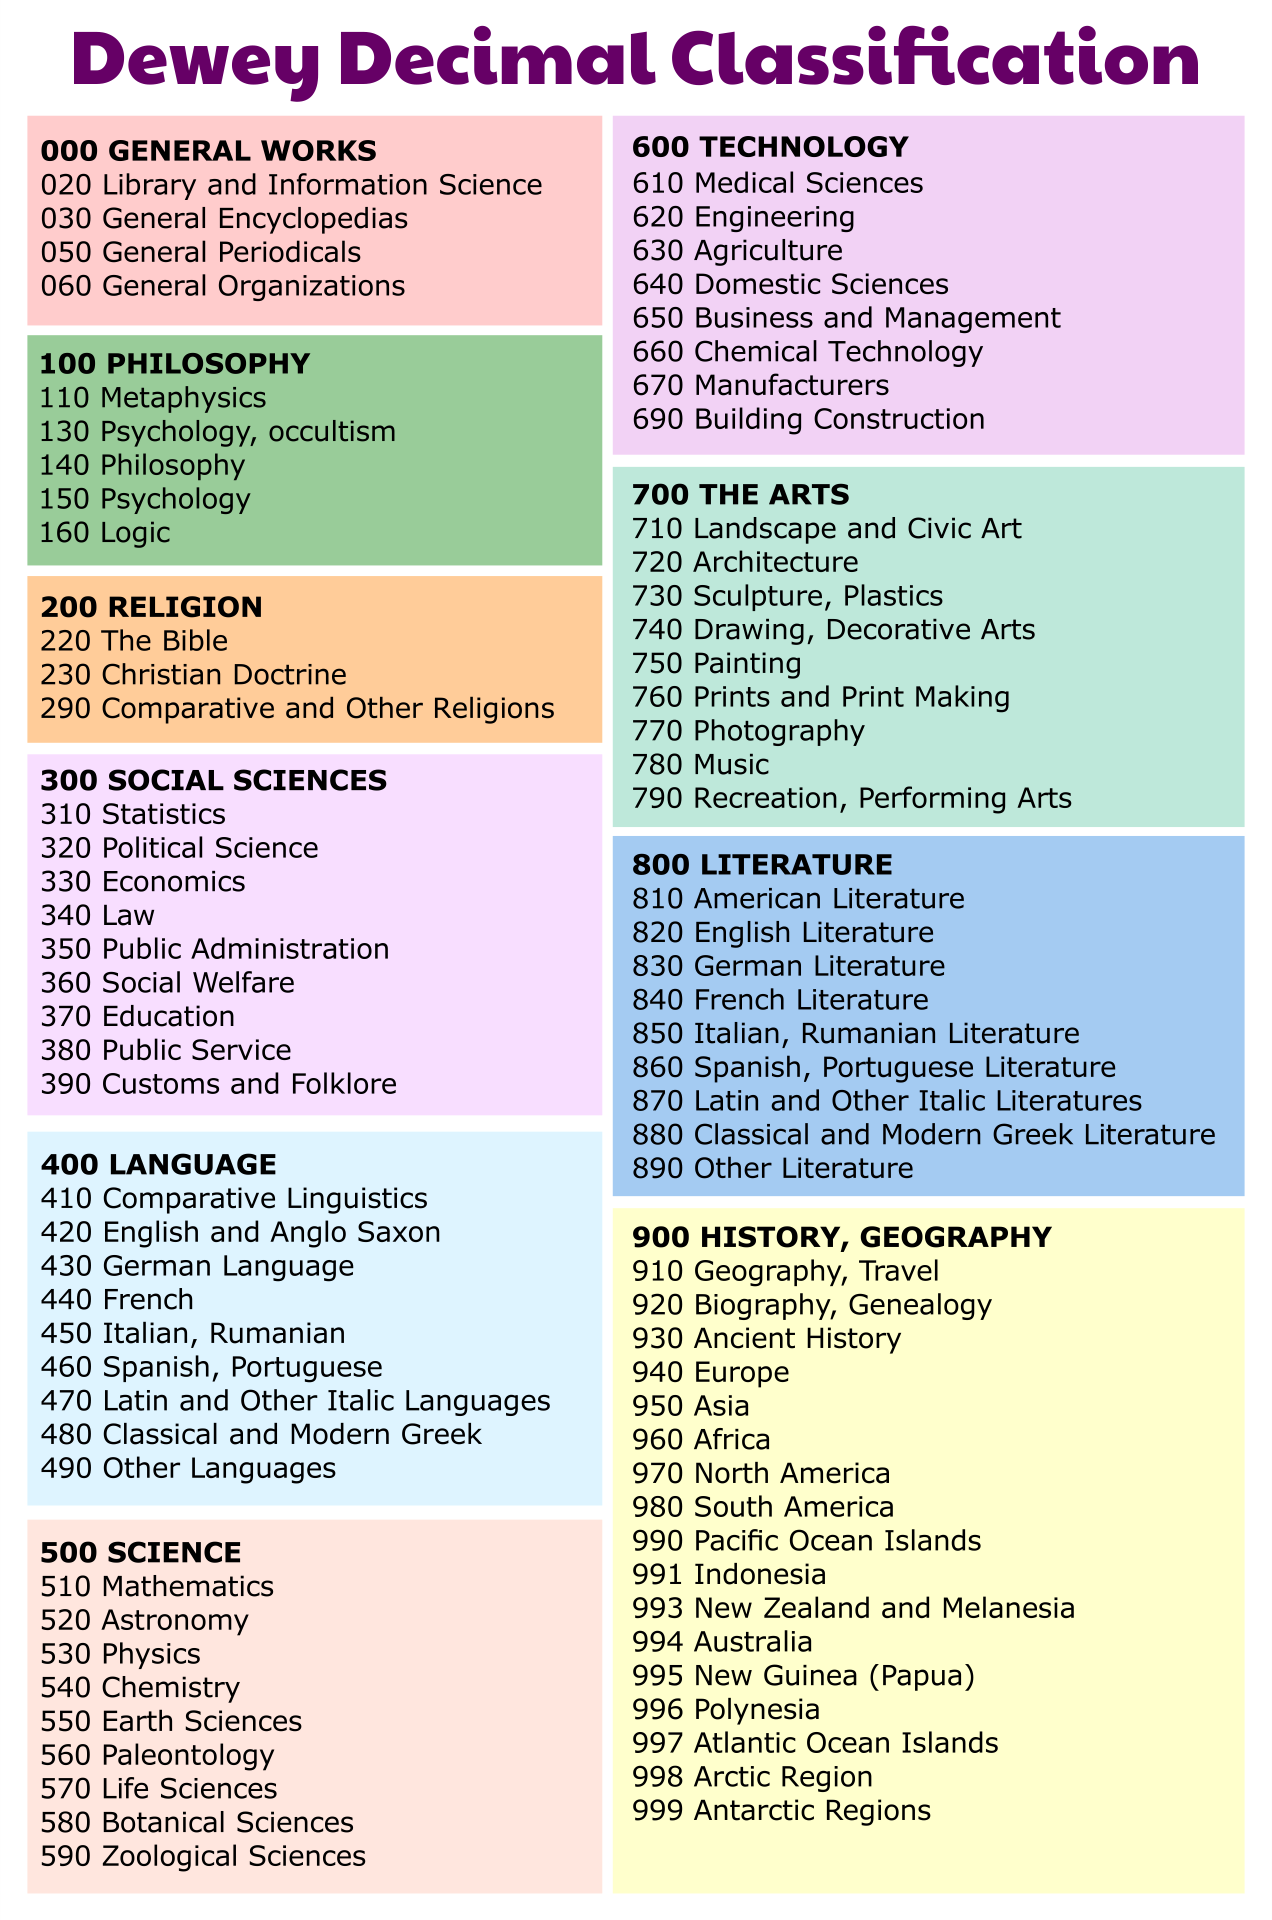 8-best-images-of-printable-dewey-decimal-system-posters-for-free-dewey-decimal-classification